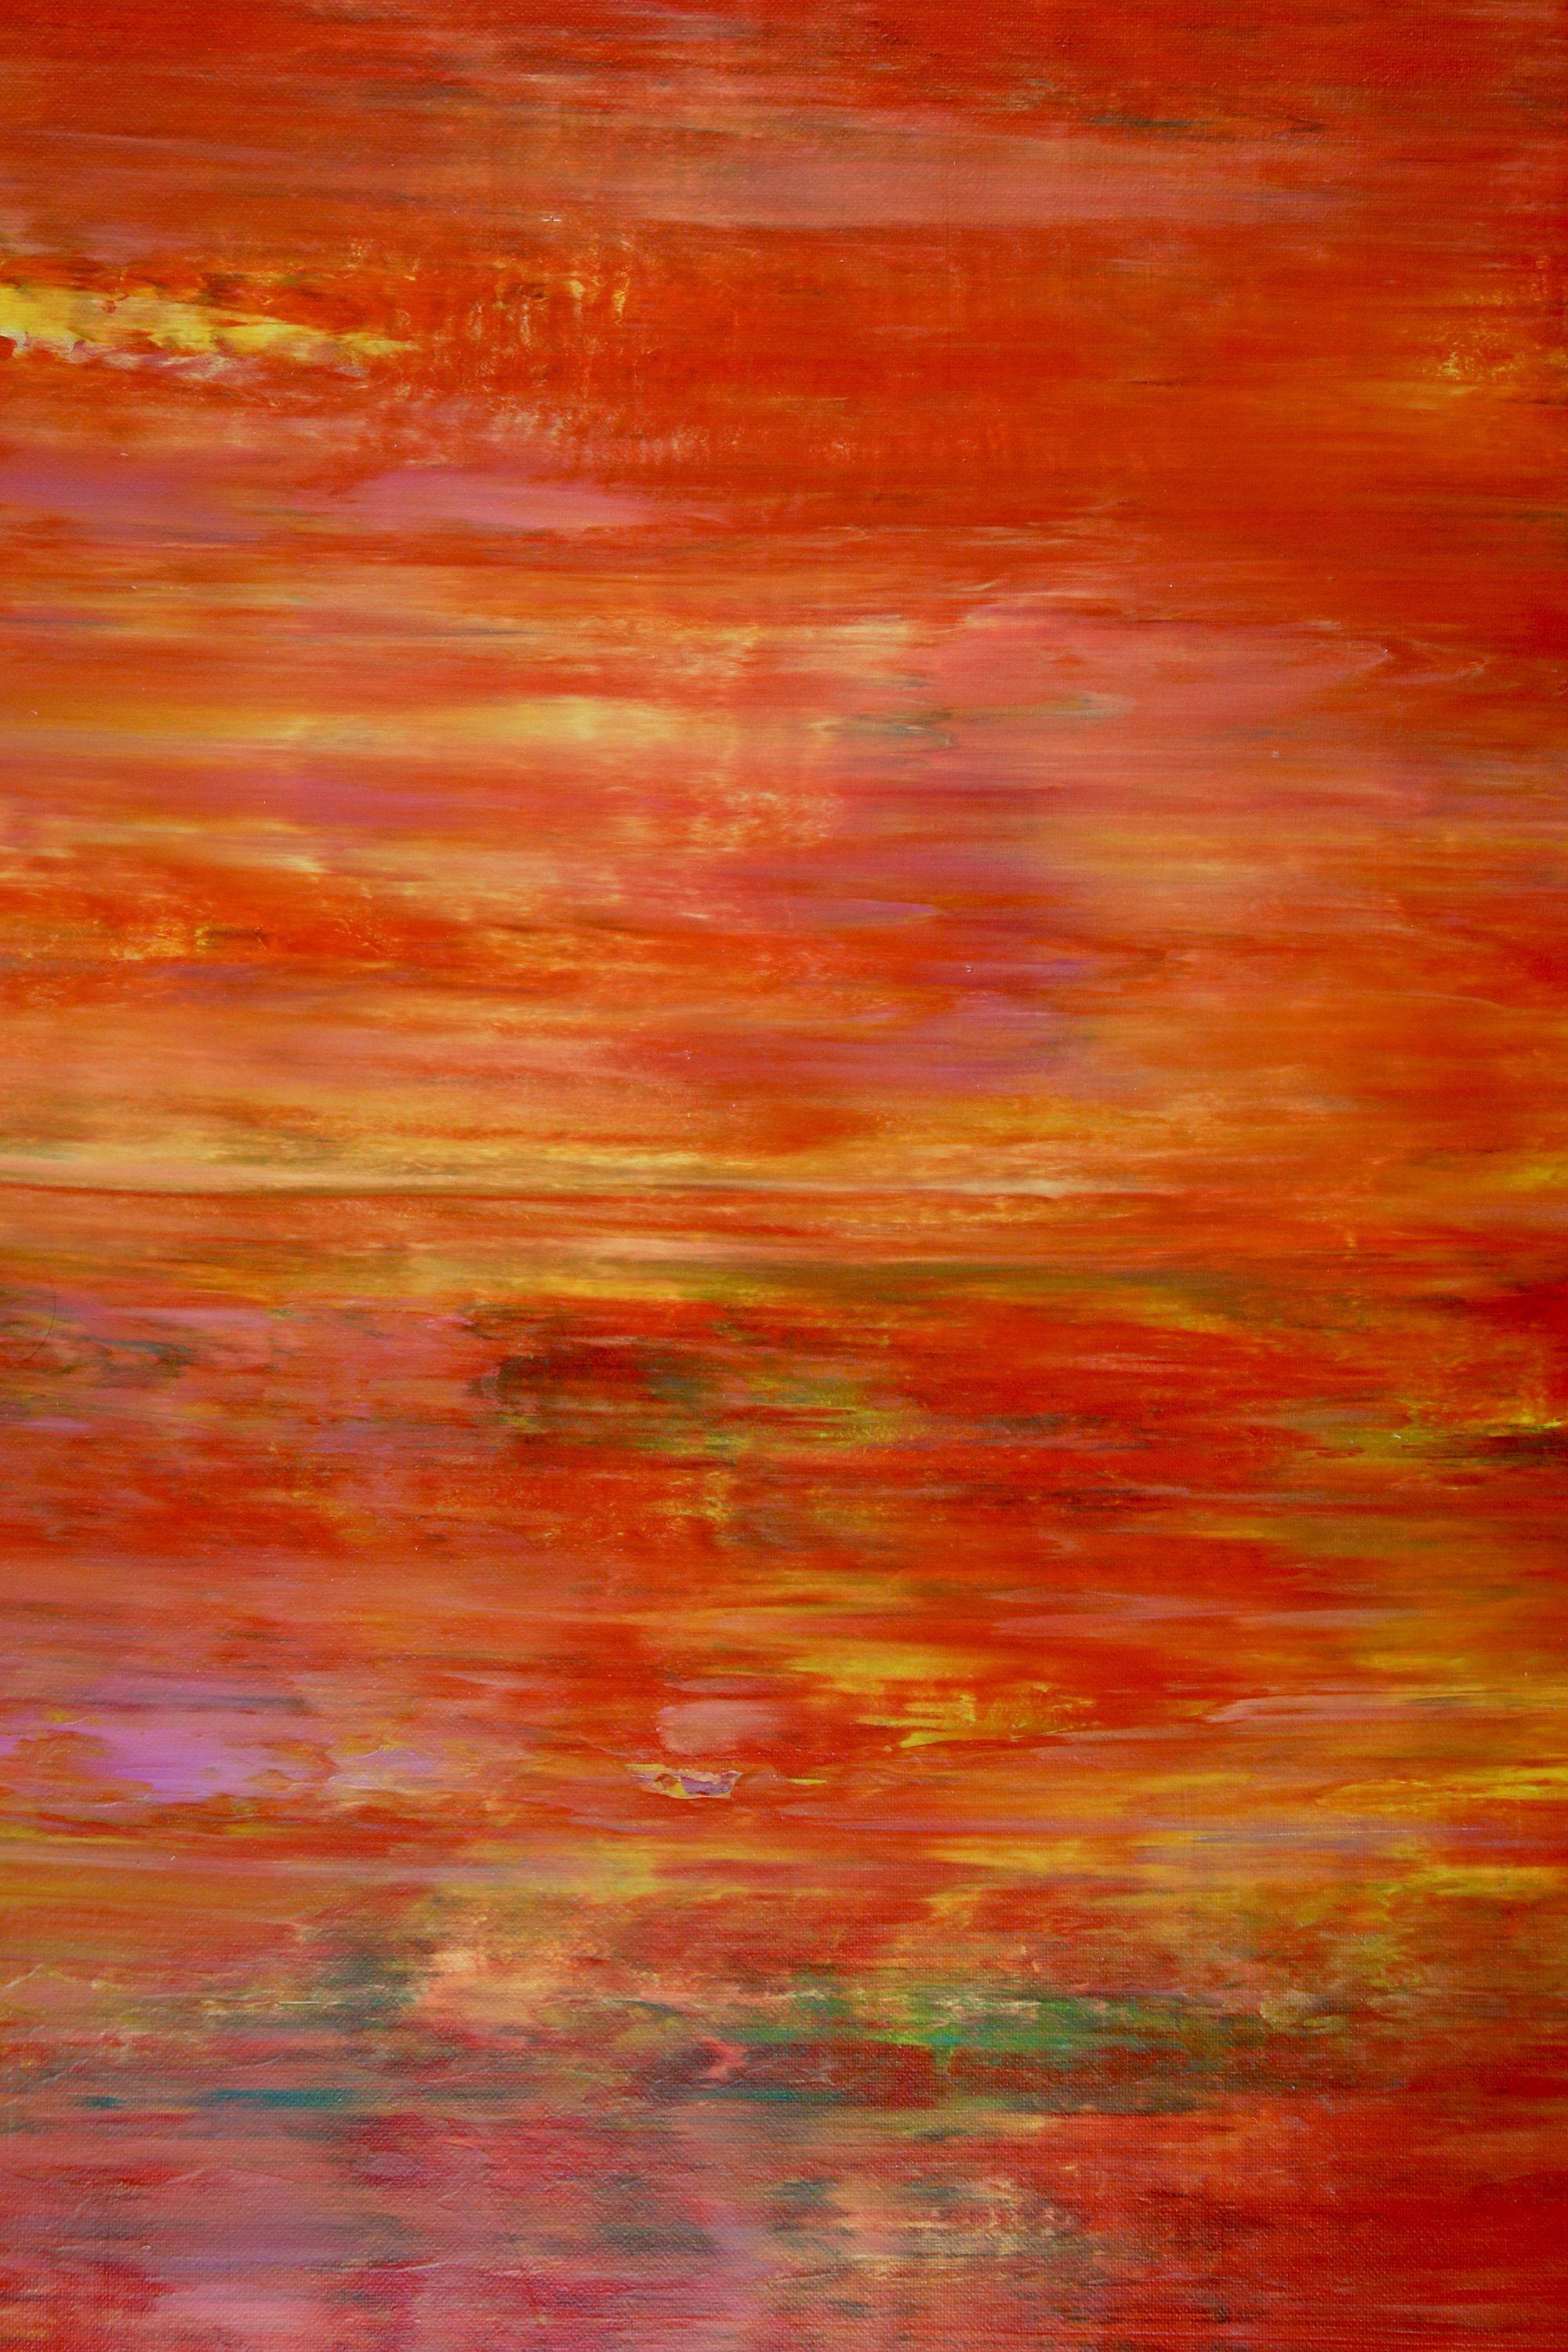 Sunset paradise 2, Painting, Acrylic on Canvas - Red Abstract Painting by Nestor Toro